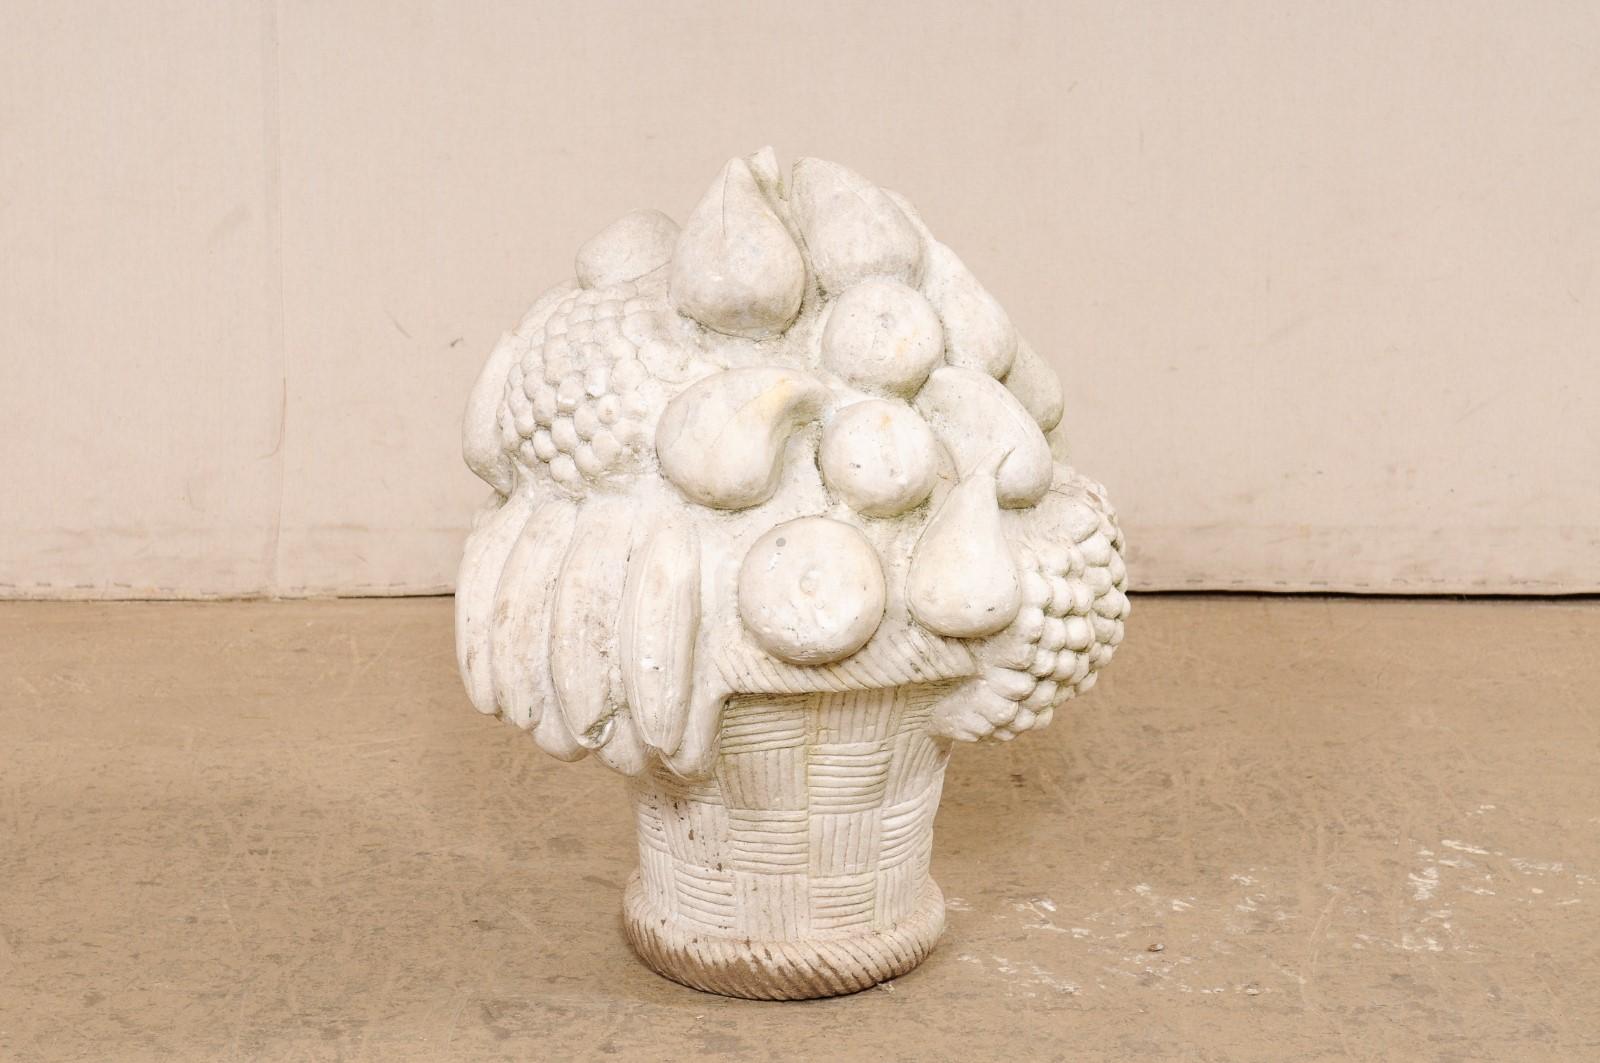 A European carved-stone basket of fruit garden statue. This vintage ornament from Europe has been hand-carved of stone (likely marble) in the image of a hand-woven basket overflowing with a fruit bouquet of grapes, pears, bananas, and apples. The